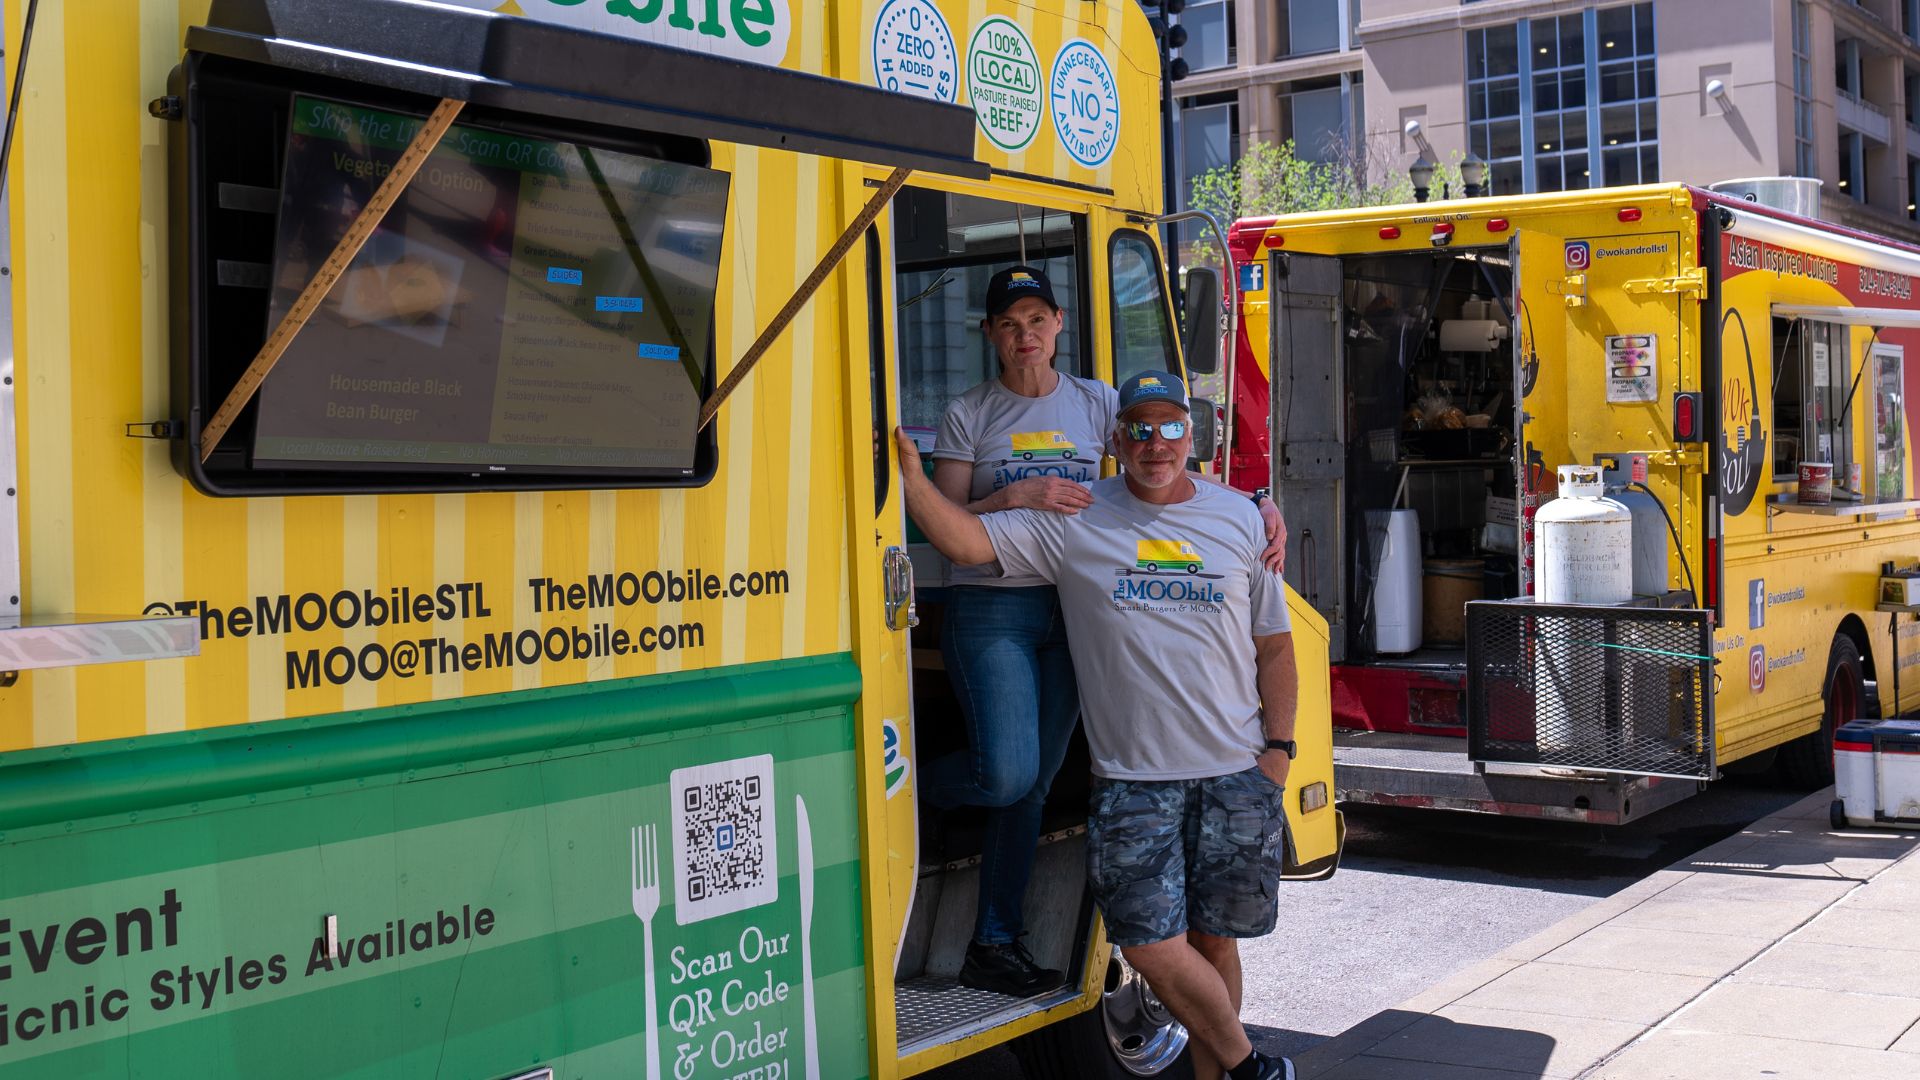 Rachelle L’Ecuyer and Ken Evans pose by their food truck, The MOObile.